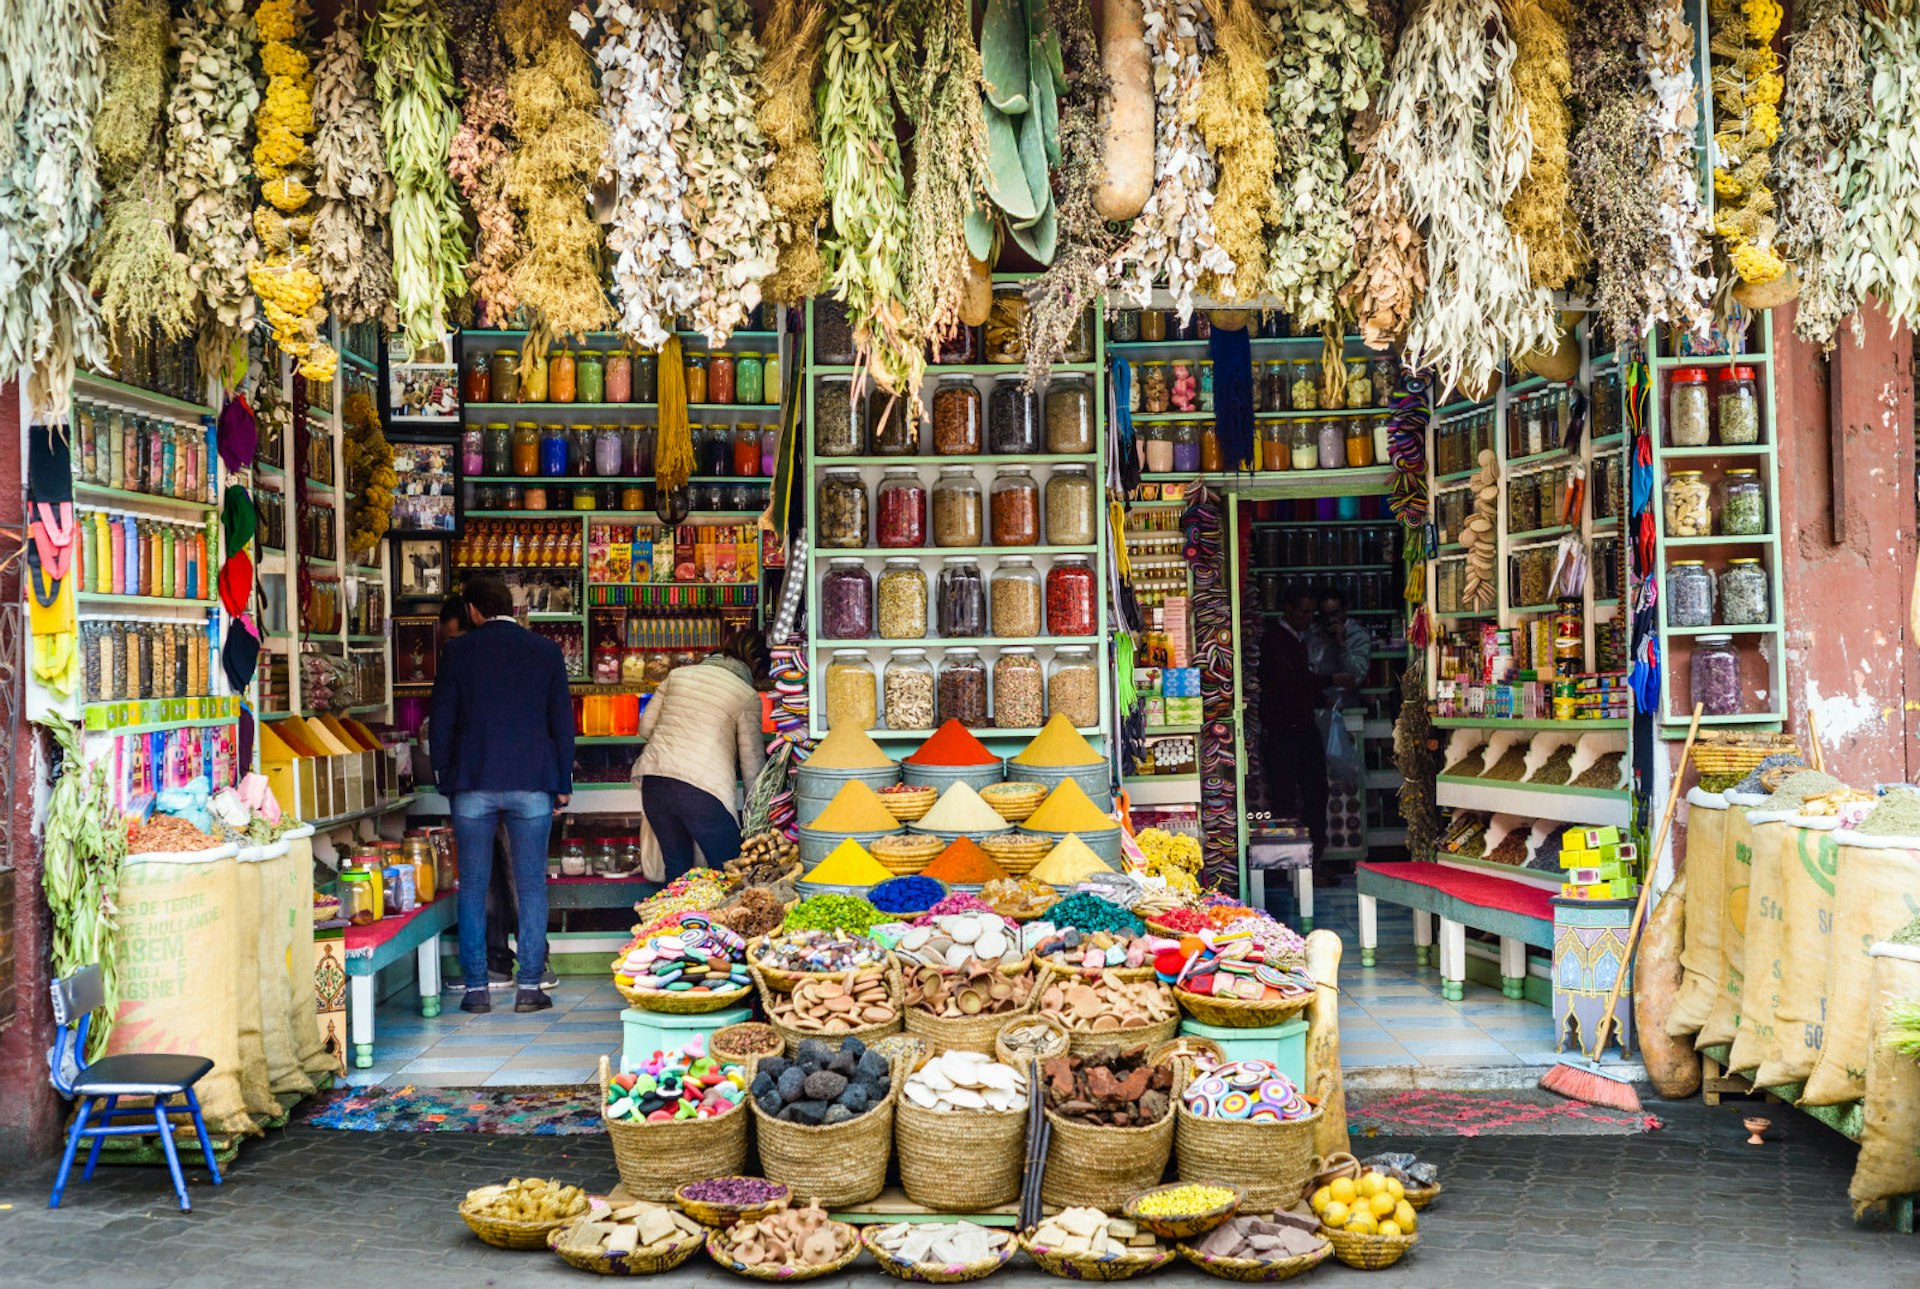 Shoppers survey the colourful local produce in Marrakesh, Morocco © A J Withey / Getty Images